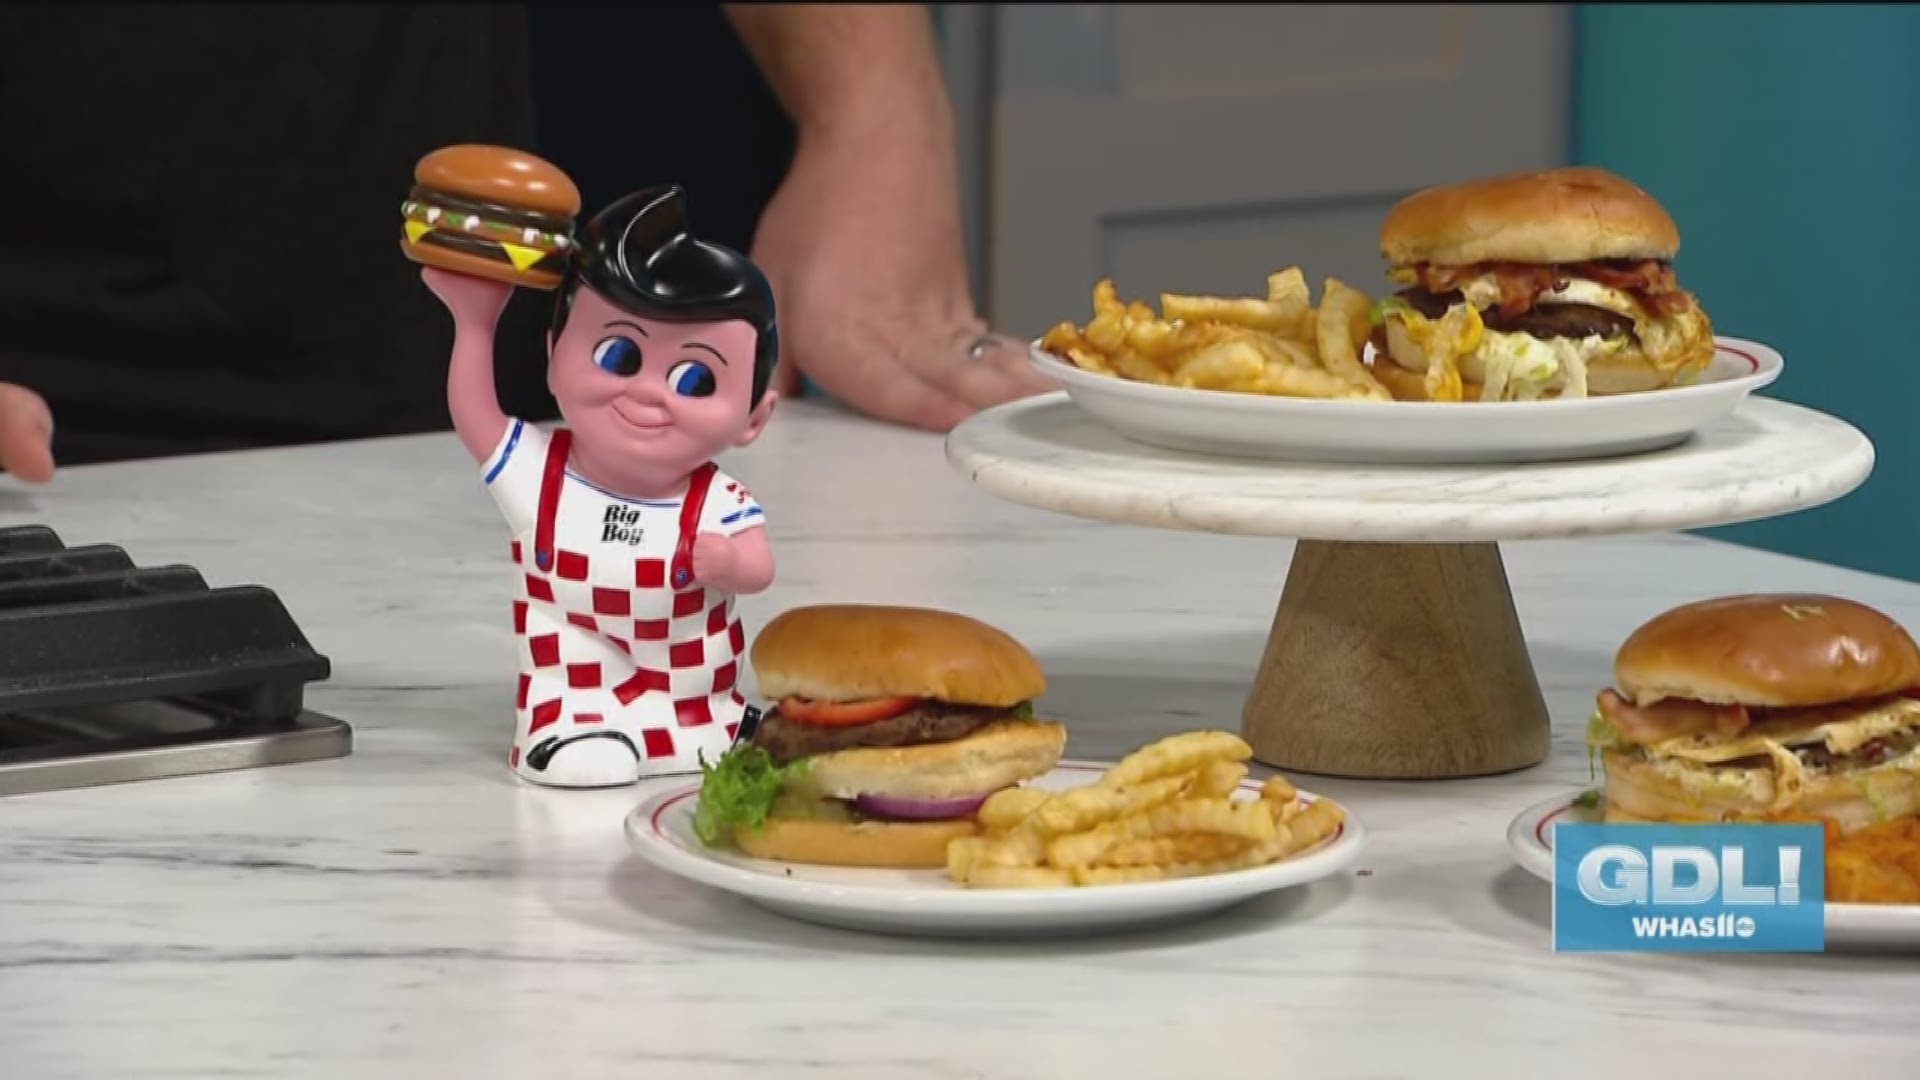 You can check out the three new Big Boy Burgers at any of the local Frisch's Big Boy restaurants. You can find the location nearest you at Frischs.com.